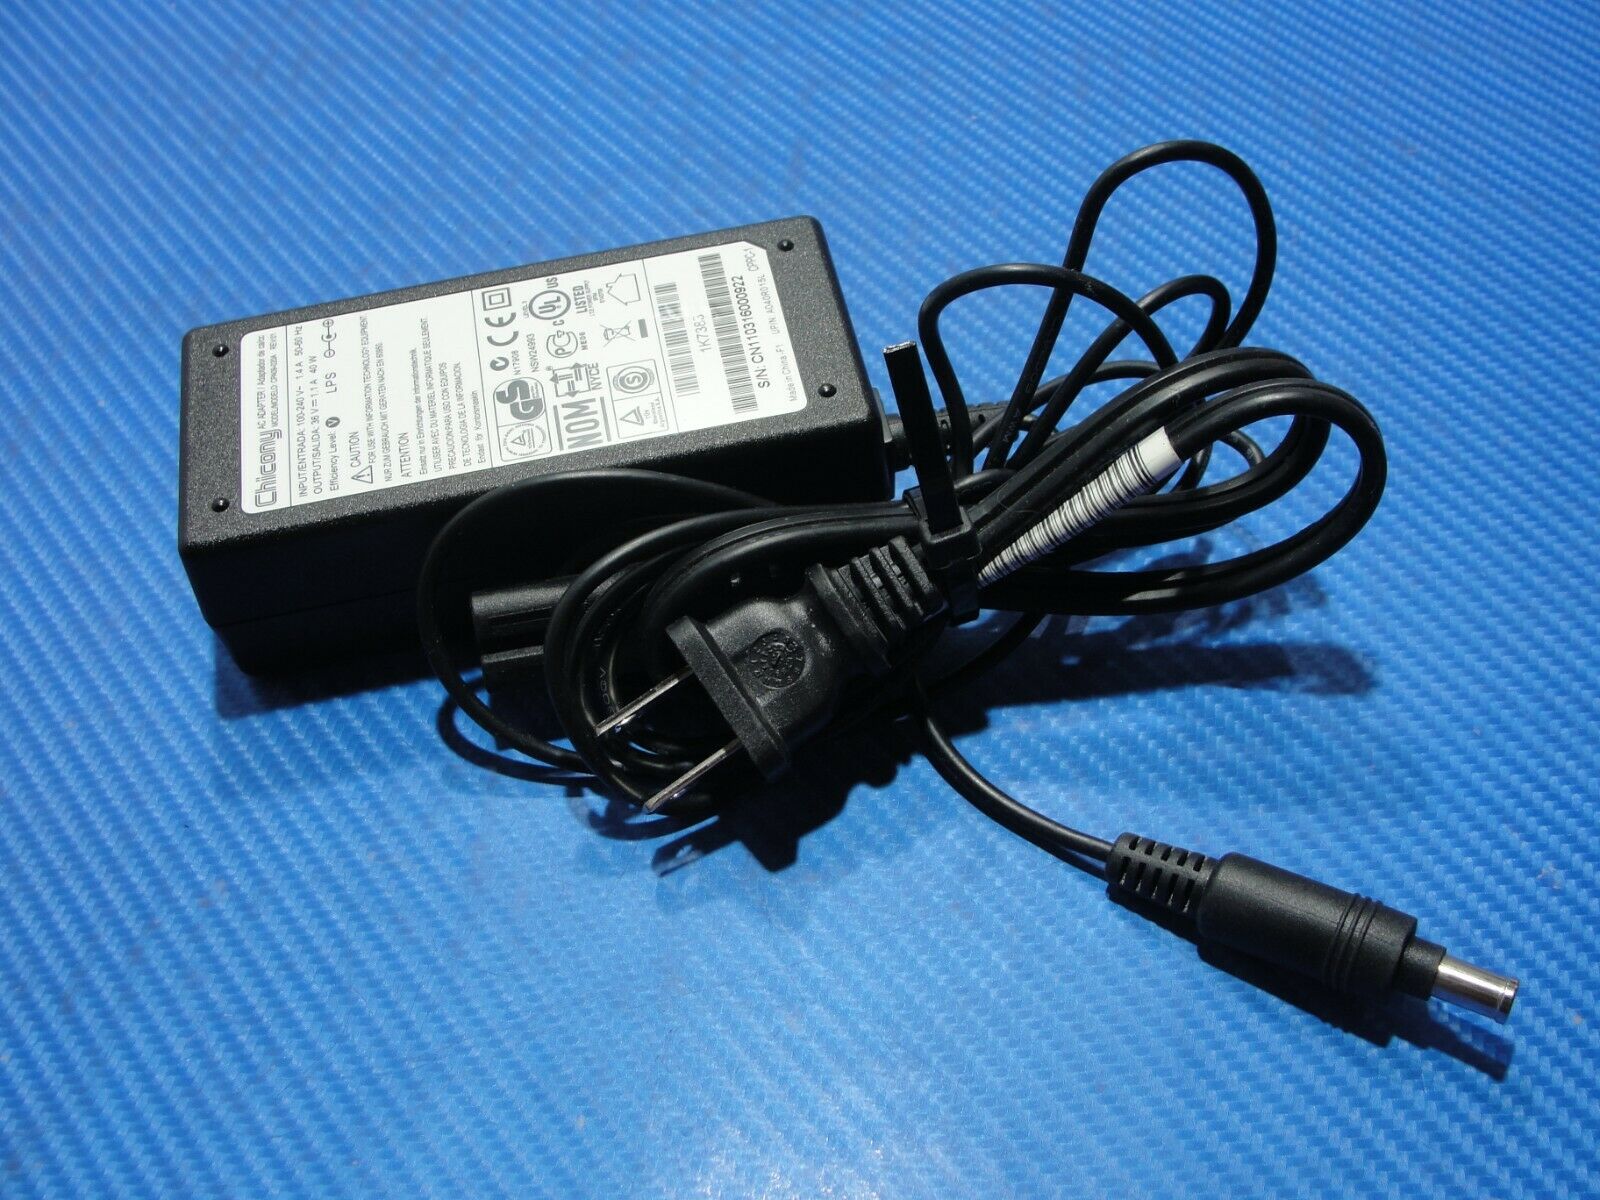 Genuine Chicony AC Adapter Power Charger 36V 1.1A 40W CN110316000922 1K7383 - Laptop Parts - Buy Authentic Computer Parts - Top Seller Ebay